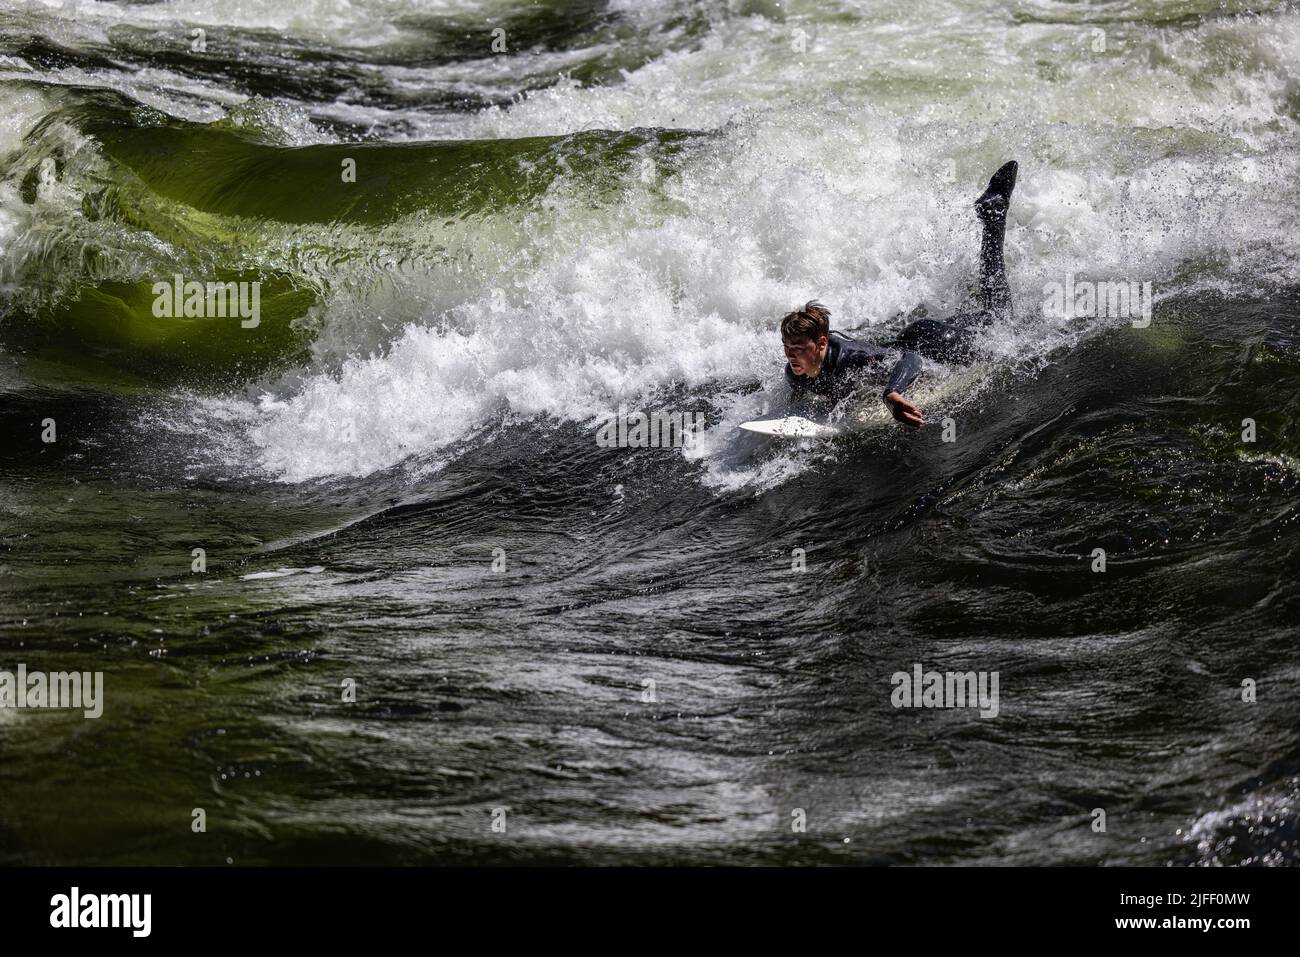 Koskia, Idaho/USA - June 22, 2022: Surfer enjoying the pipeline in the Lochsa river. The pipeline is known as one of the premiere river surfing waves Stock Photo